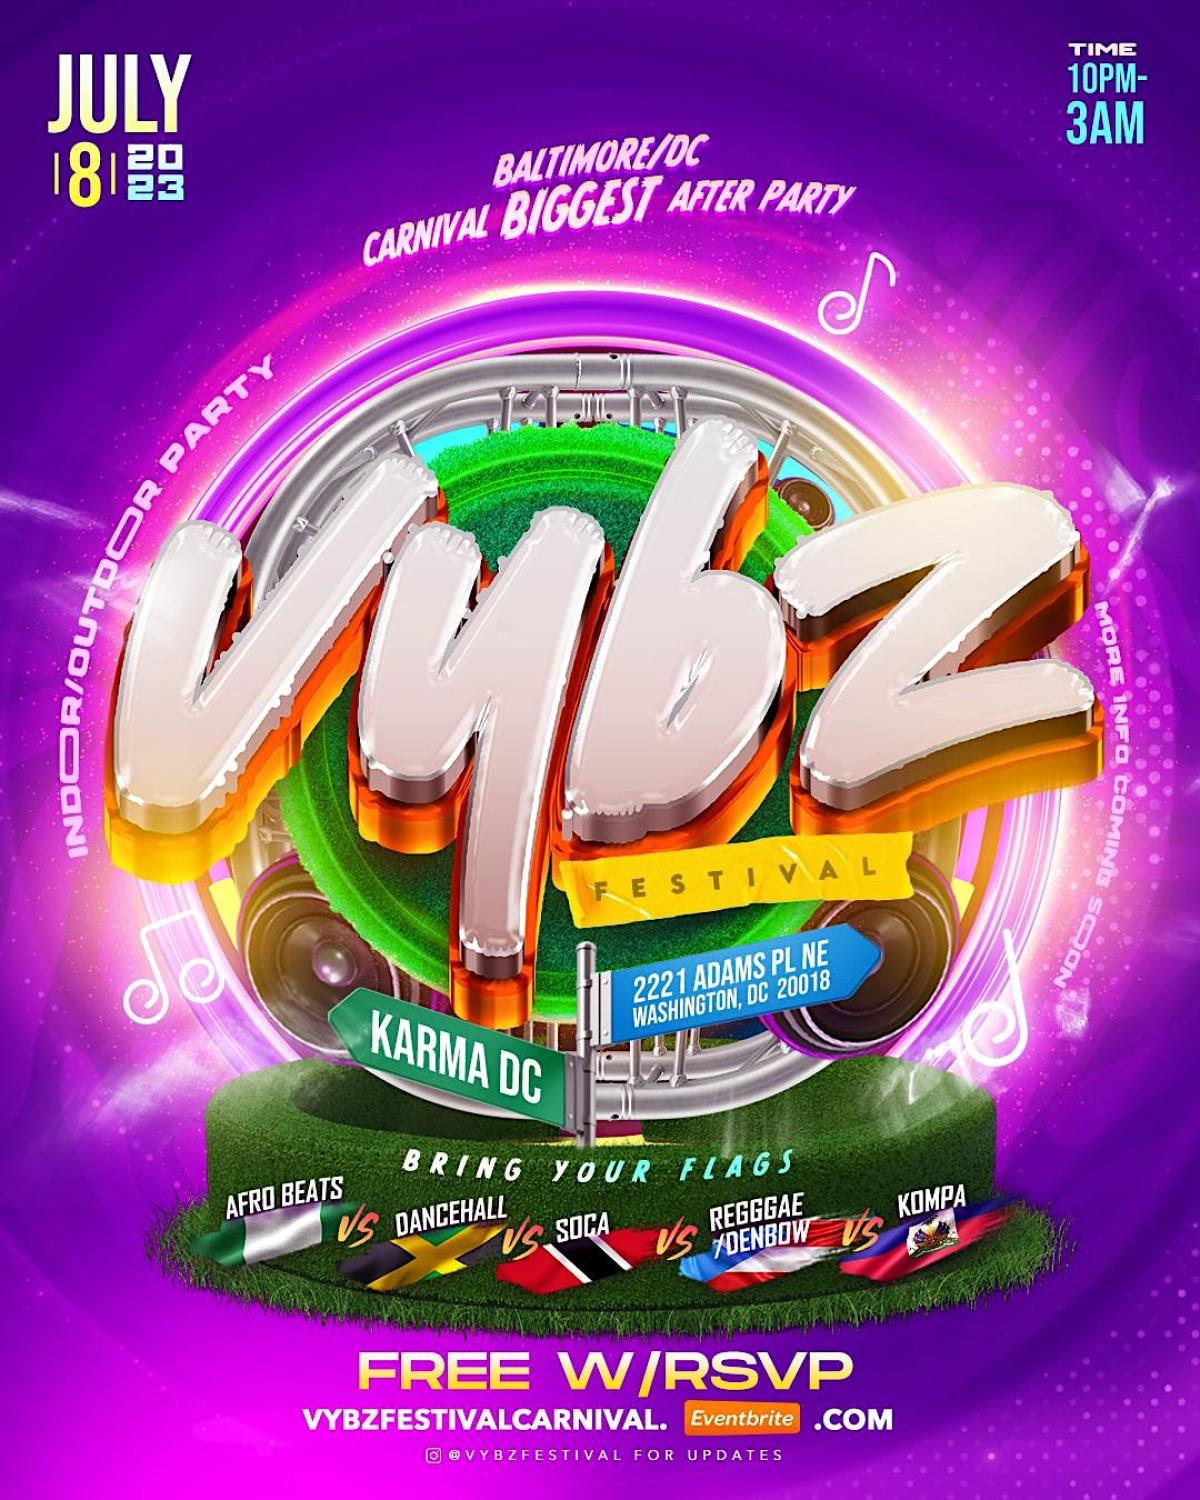 Vybz Festival Carnival flyer or graphic.